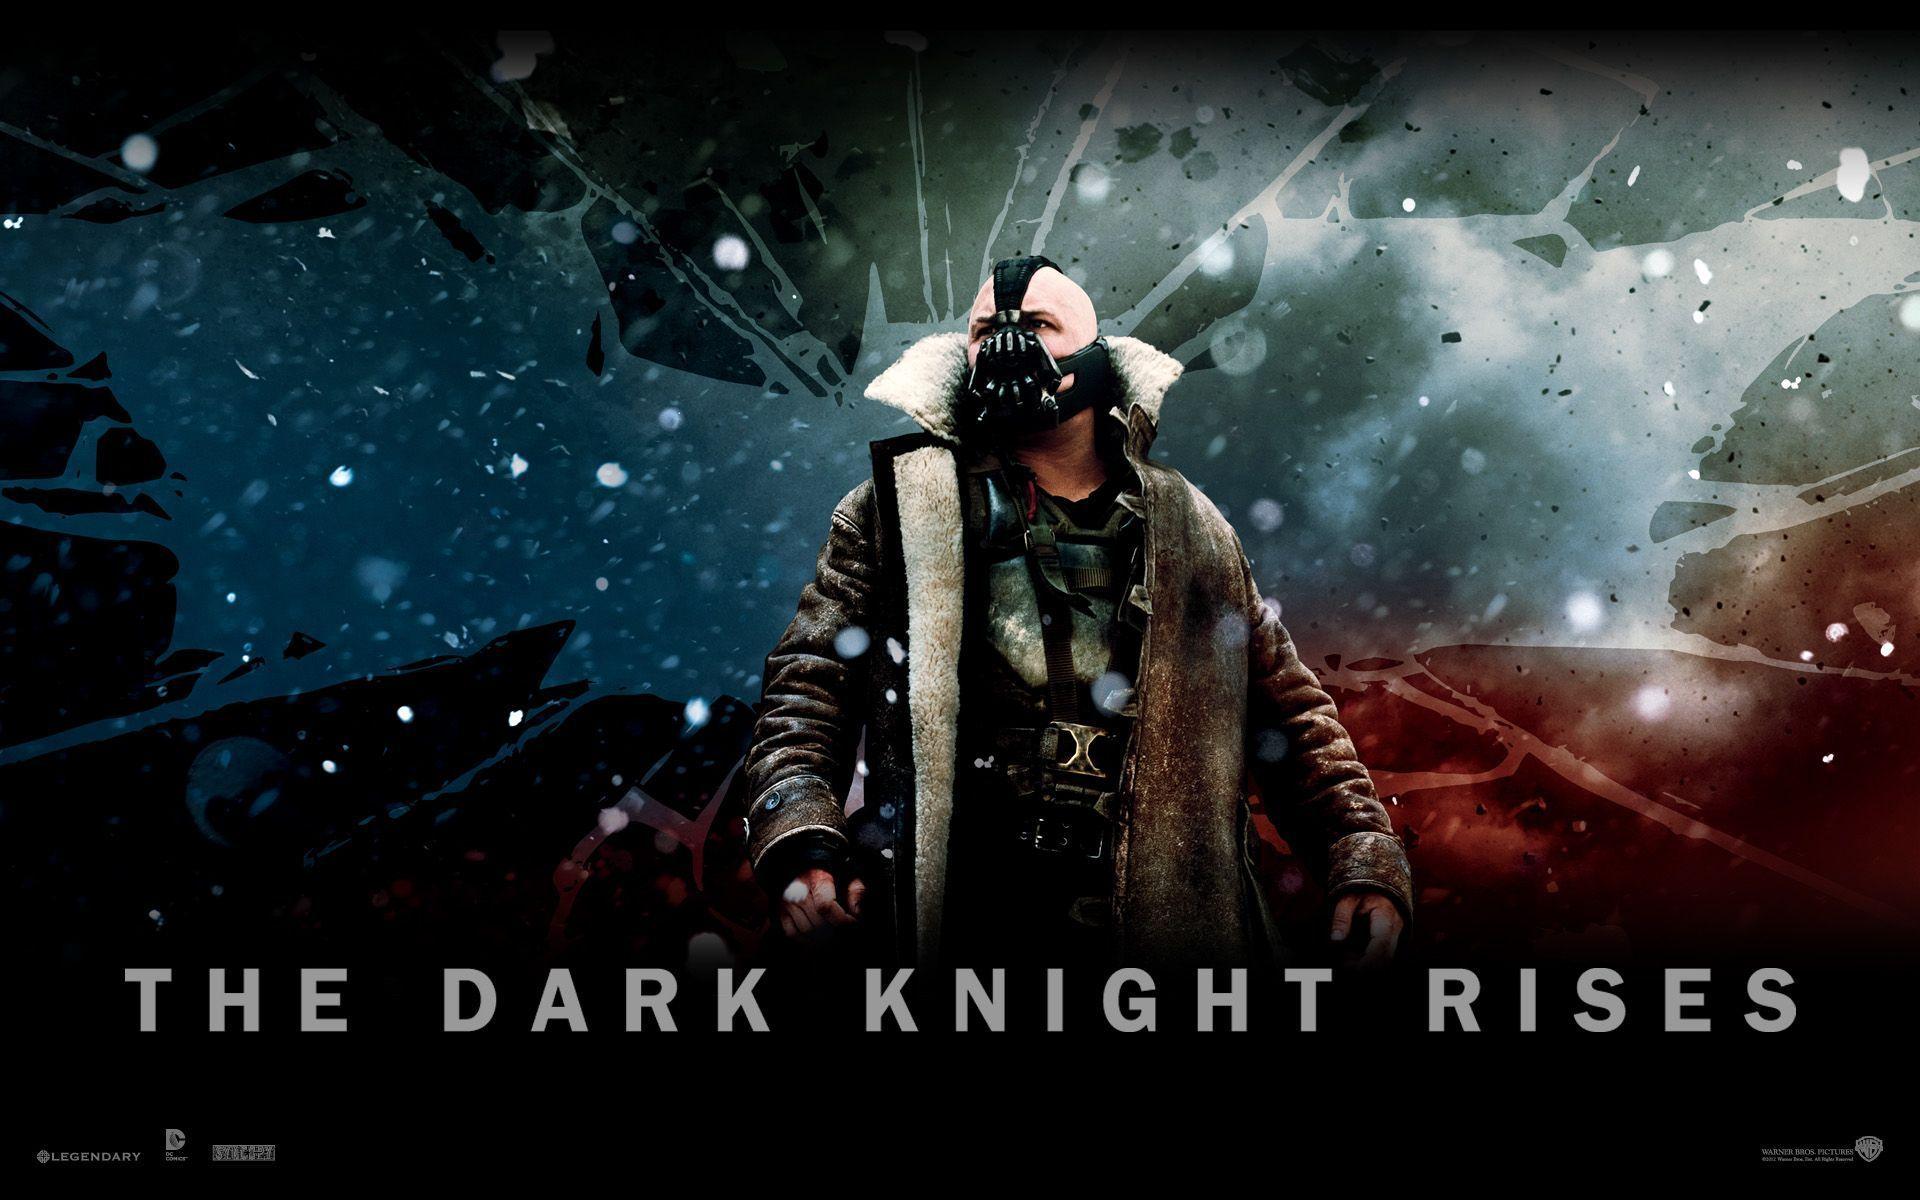 THE DARK KNIGHT RISES OFFICIAL HD WALLPAPER , BACKGROUNDS, HD, IMAGES